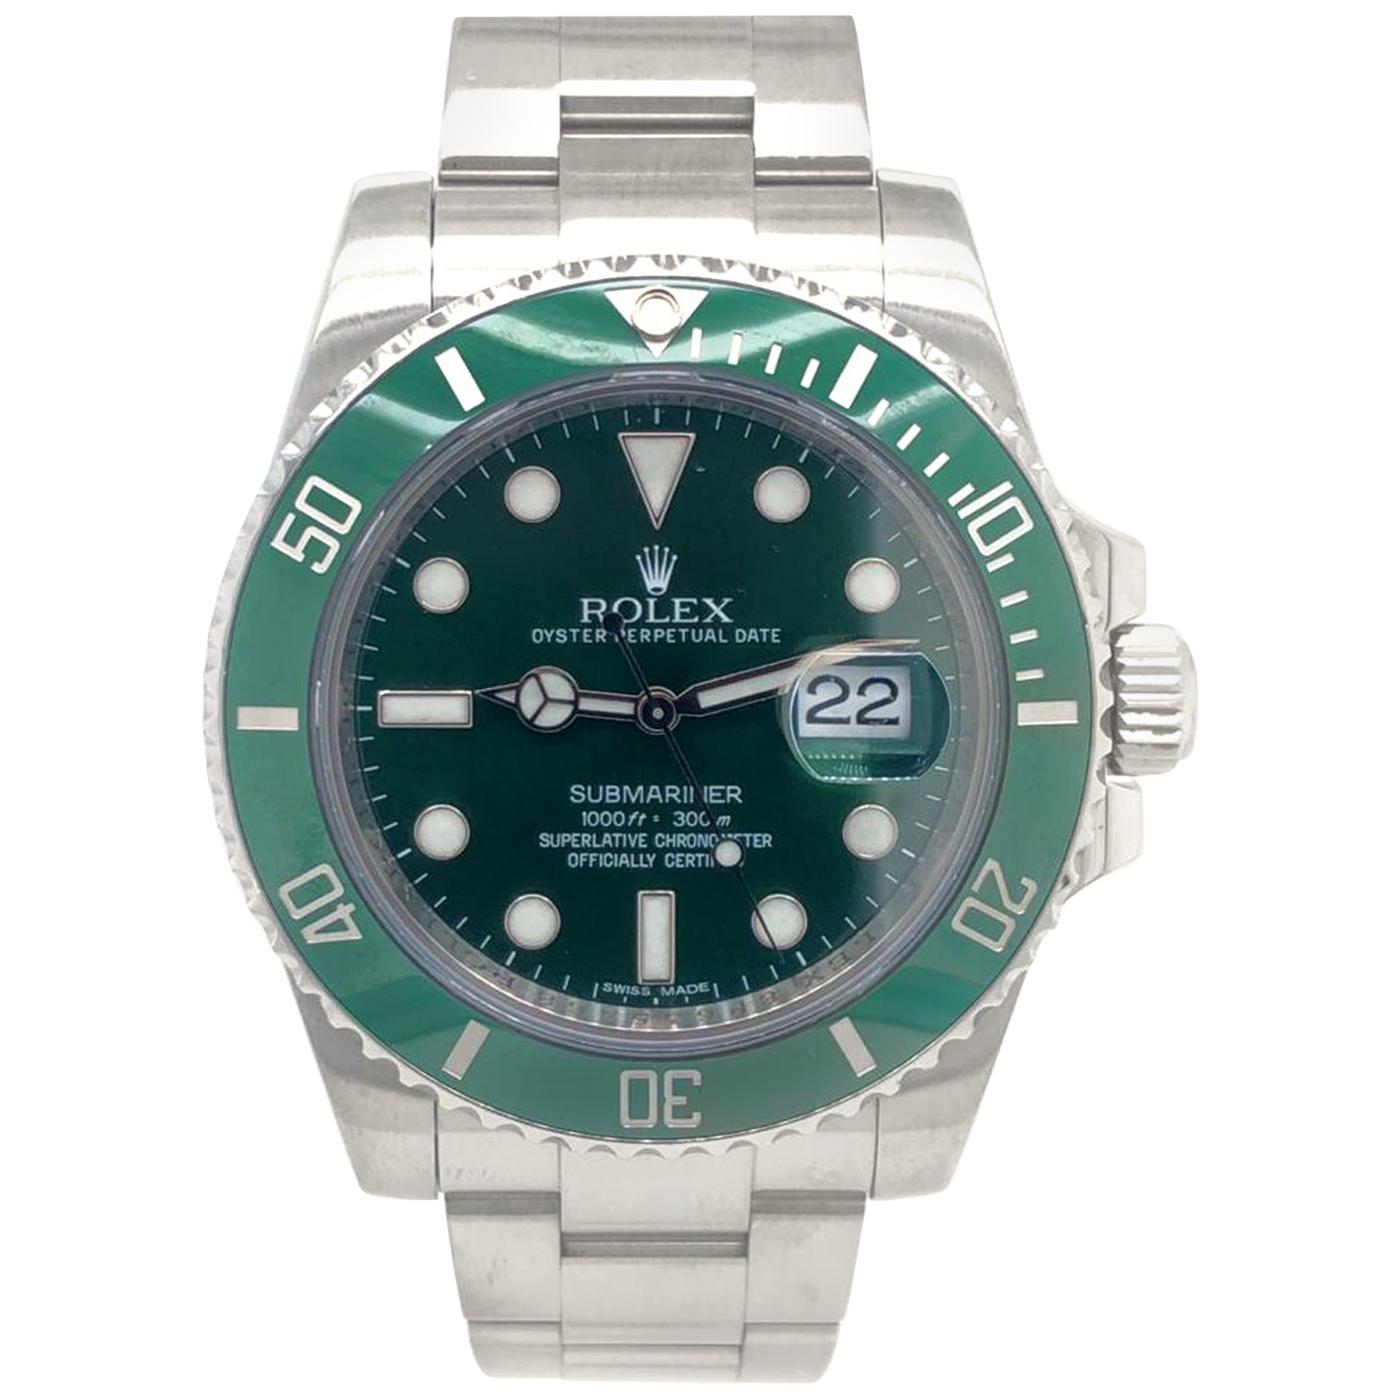 The Oyster Perpetual Submariner Date in Oystersteel with a Cerachrom bezel insert in green ceramic and a black dial with large luminescent hour markers. It features a unidirectional rotatable bezel and solid-link Oyster bracelet. The latest